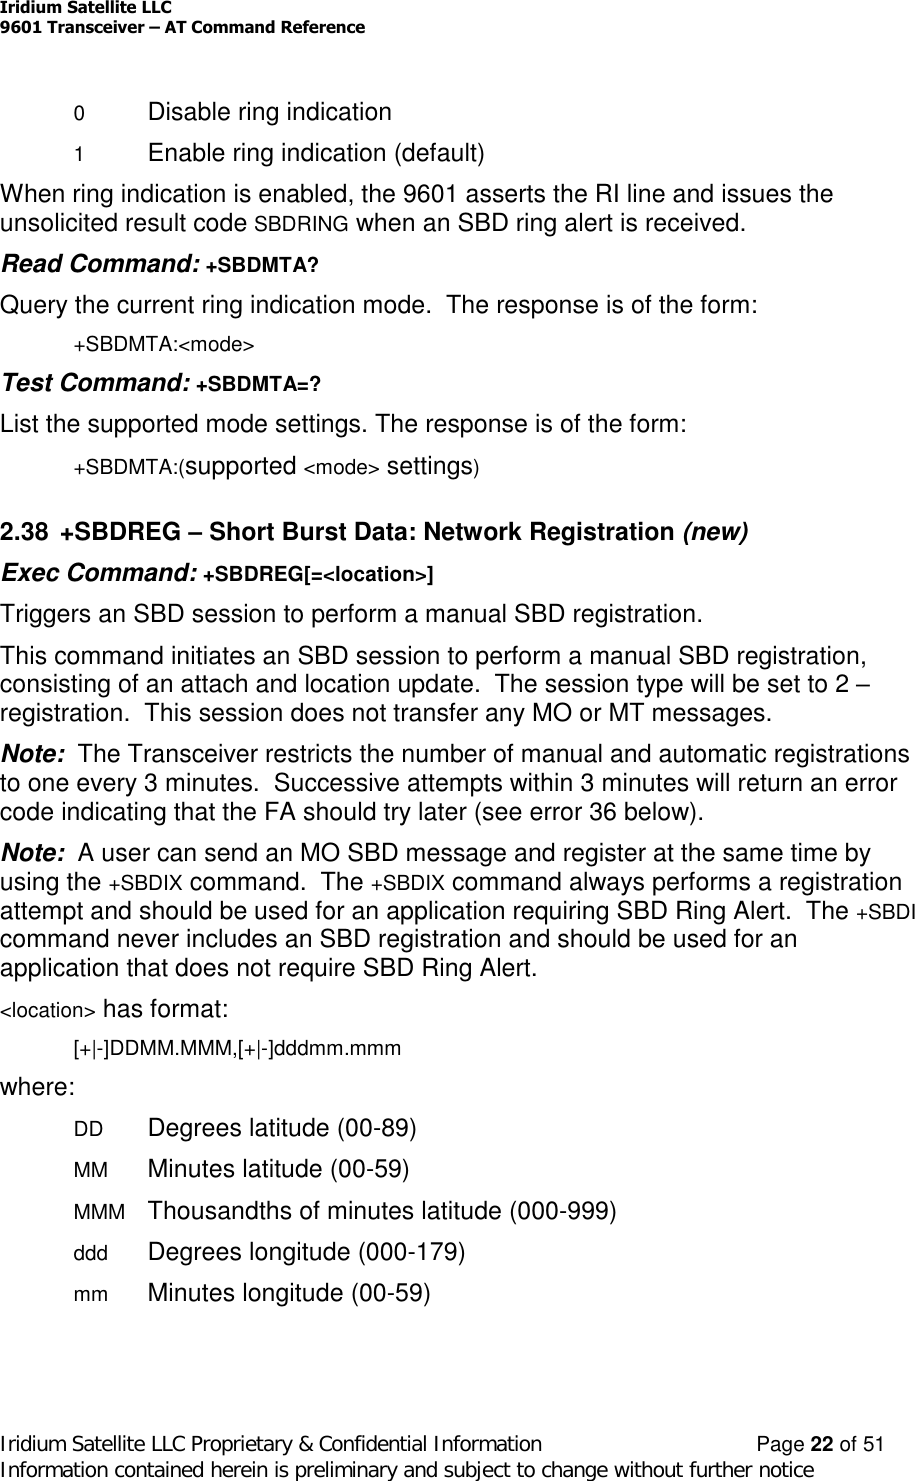 Iridium Satellite LLC9601 Transceiver –AT Command ReferenceIridium Satellite LLC Proprietary &amp; Confidential Information Page 22 of 51Information contained herein is preliminary and subject to change without further notice0Disable ring indication1Enable ring indication (default)When ring indication is enabled, the 9601 asserts the RI line and issues theunsolicited result code SBDRING when an SBD ring alert is received.Read Command: +SBDMTA?Query the current ring indication mode. The response is of the form:+SBDMTA:&lt;mode&gt;Test Command: +SBDMTA=?List the supported mode settings. The response is of the form:+SBDMTA:(supported &lt;mode&gt; settings)2.38 +SBDREG –Short Burst Data: Network Registration (new)Exec Command: +SBDREG[=&lt;location&gt;]Triggers an SBD session to perform a manual SBD registration.This command initiates an SBD session to perform a manual SBD registration,consisting of an attach and location update. The session type will be set to 2 –registration. This session does not transfer any MO or MT messages.Note: The Transceiver restricts the number of manual and automatic registrationsto one every 3 minutes. Successive attempts within 3 minutes will return an errorcode indicating that the FA should try later (see error 36 below).Note: A user can send an MO SBD message and register at the same time byusing the +SBDIX command. The +SBDIX command always performs a registrationattempt and should be used for an application requiring SBD Ring Alert. The +SBDIcommand never includes an SBD registration and should be used for anapplication that does not require SBD Ring Alert.&lt;location&gt; has format:[+|-]DDMM.MMM,[+|-]dddmm.mmmwhere:DD Degrees latitude (00-89)MM Minutes latitude (00-59)MMM Thousandths of minutes latitude (000-999)ddd Degrees longitude (000-179)mm Minutes longitude (00-59)